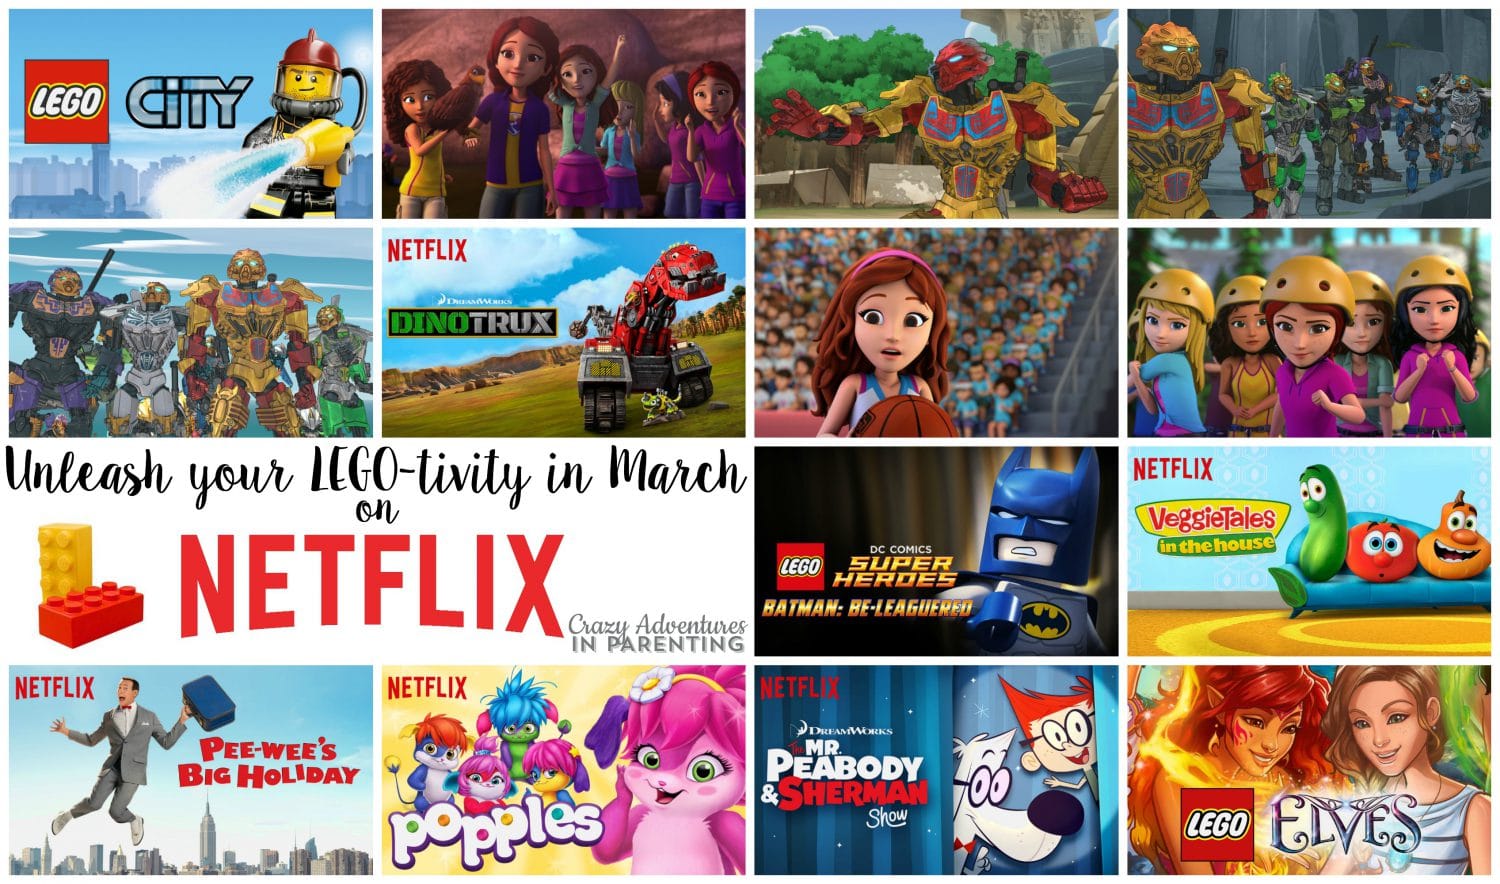 LEGO programming and more on Netflix in March